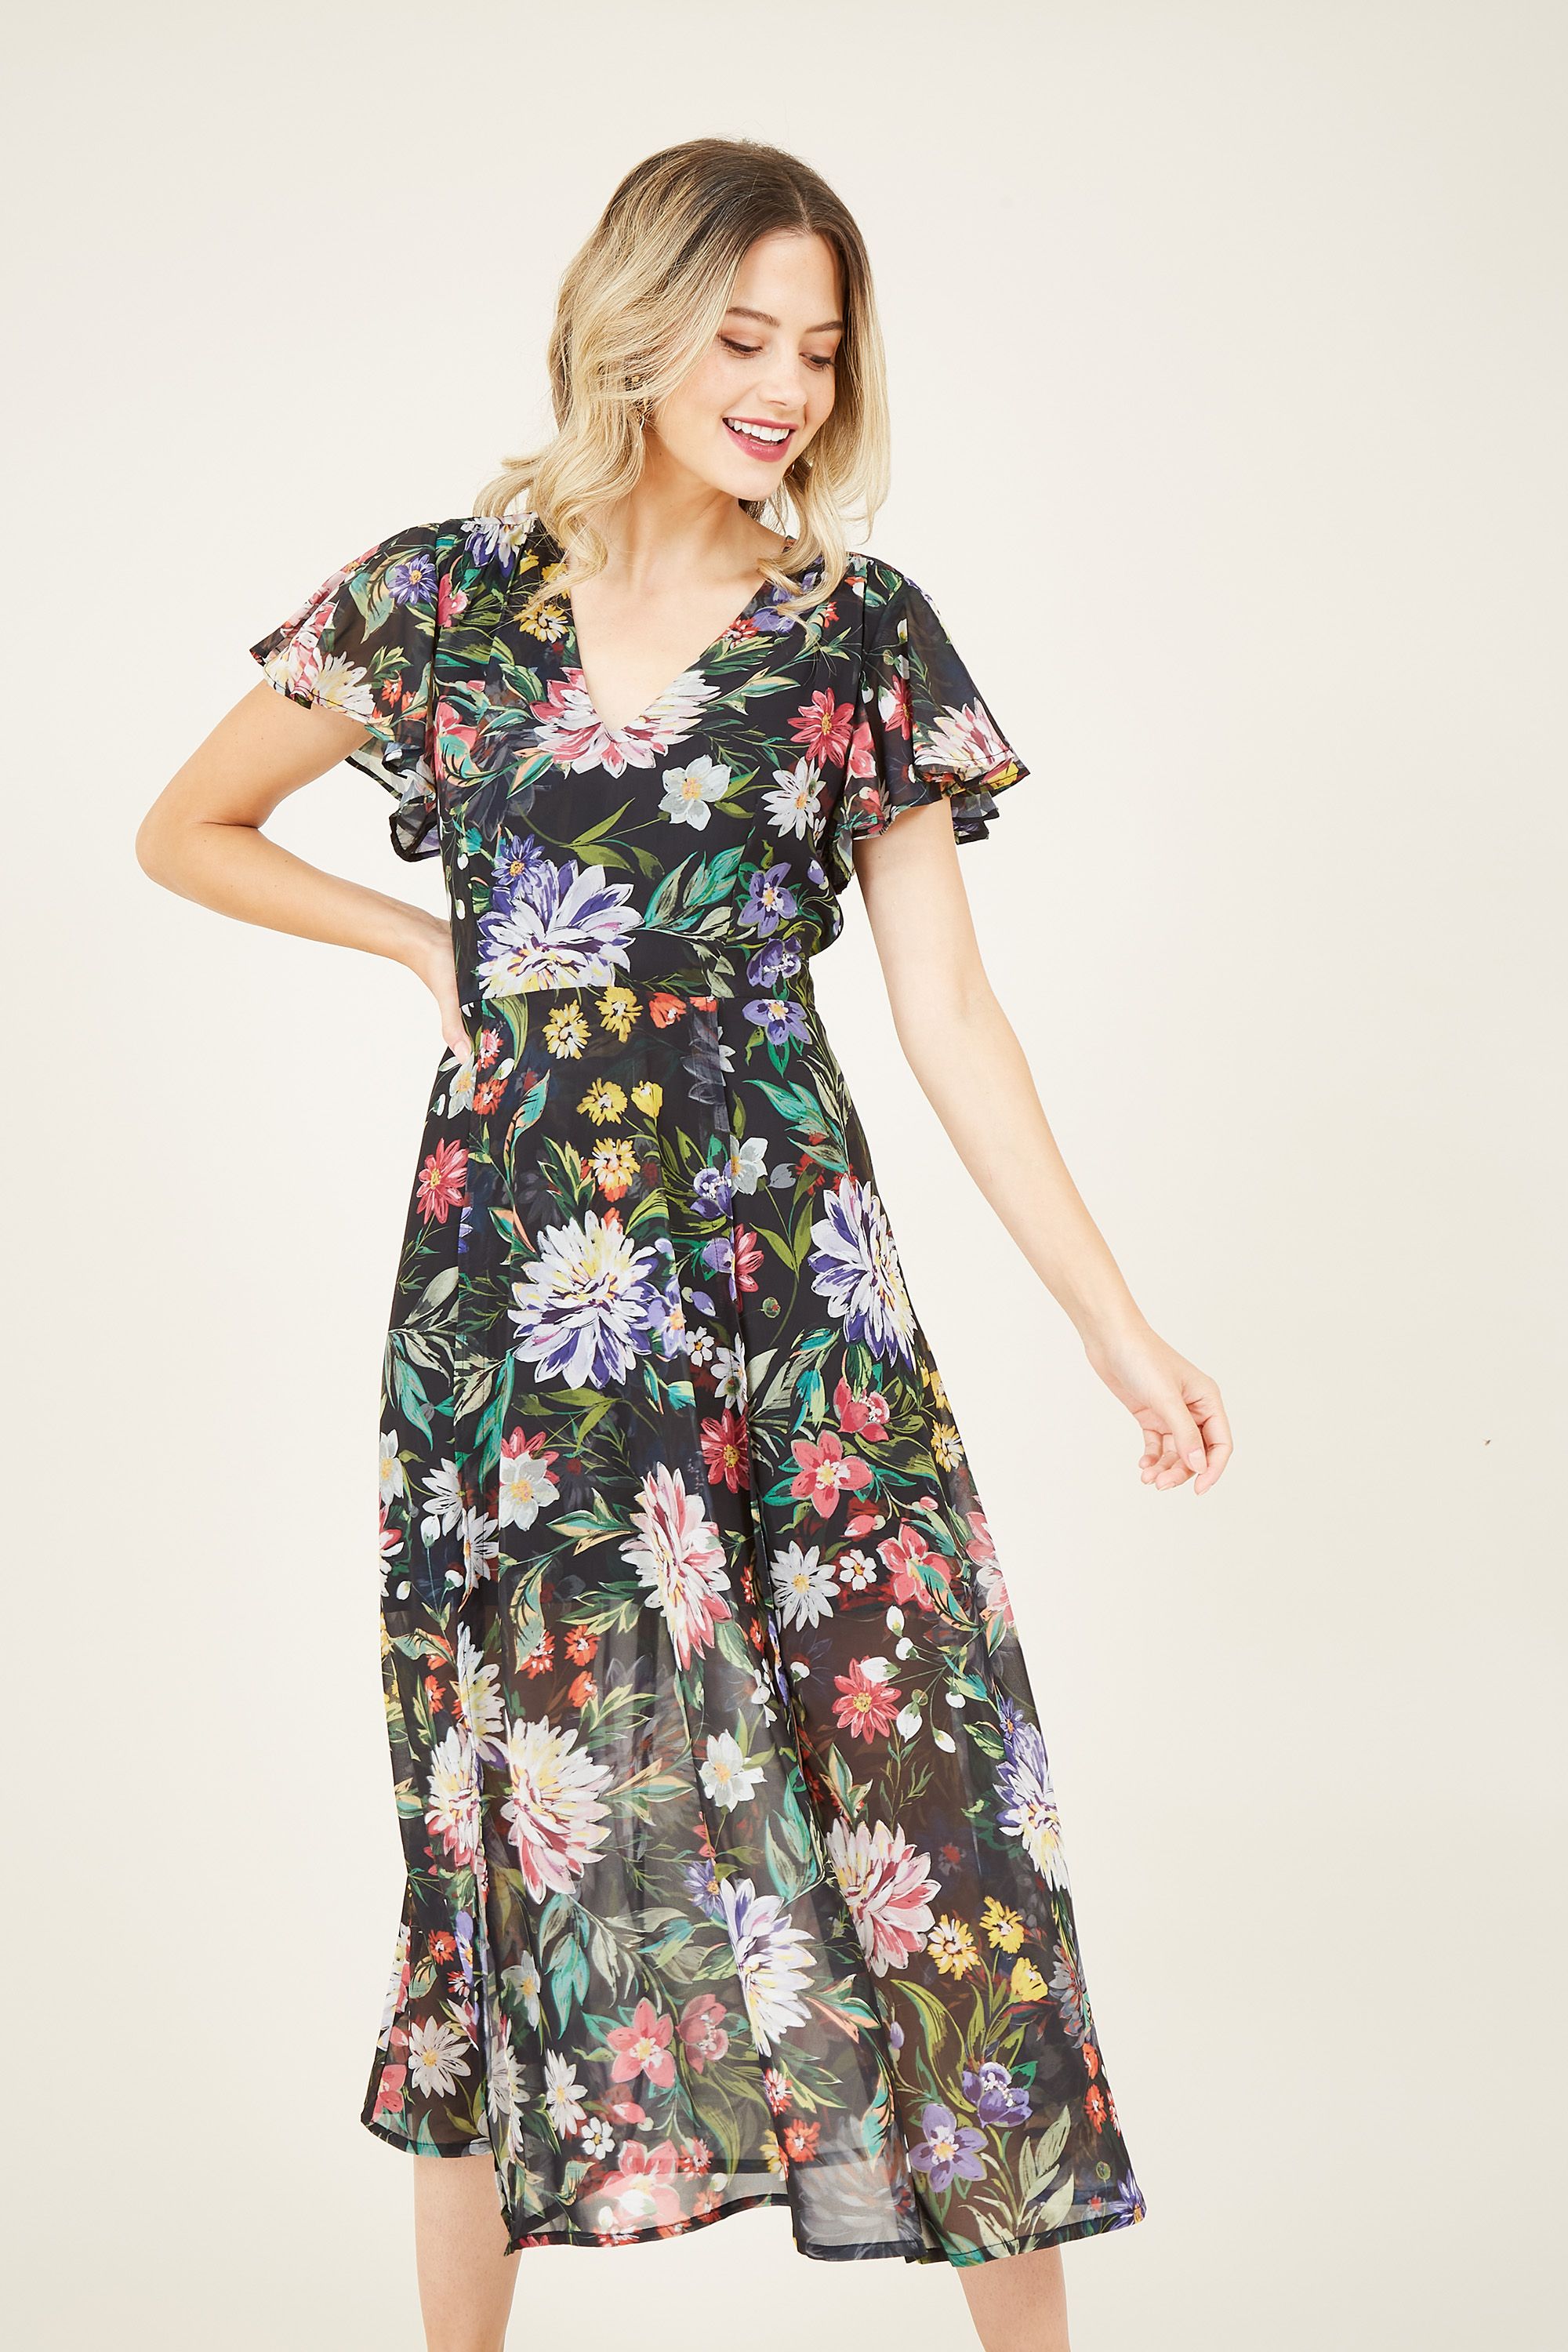 Who doesn't love a floral frock? Meet your new favourite with our Garden Floral Midi Dress. Adorned with a classic print, it features feminine V-neckline and capped sleeves. Perfect for throwing with a jacket or dressing down with trainers, it comes complete with a relaxed profile. Accessorize with heeled boots for a casual finish.